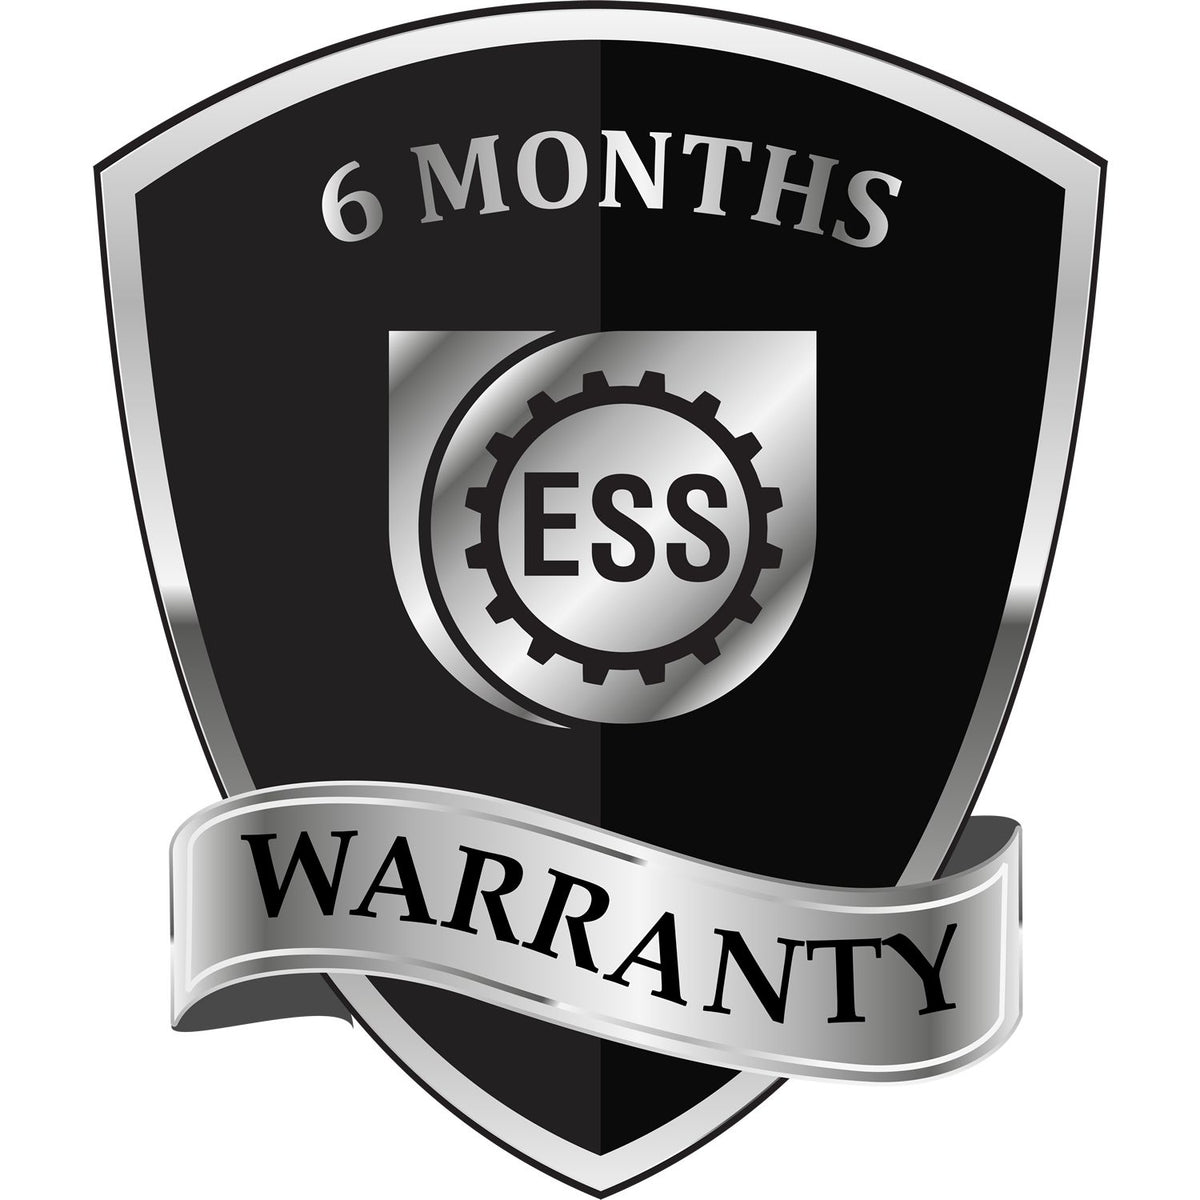 A badge or emblem showing a warranty icon for the Heavy-Duty Wisconsin Rectangular Notary Stamp